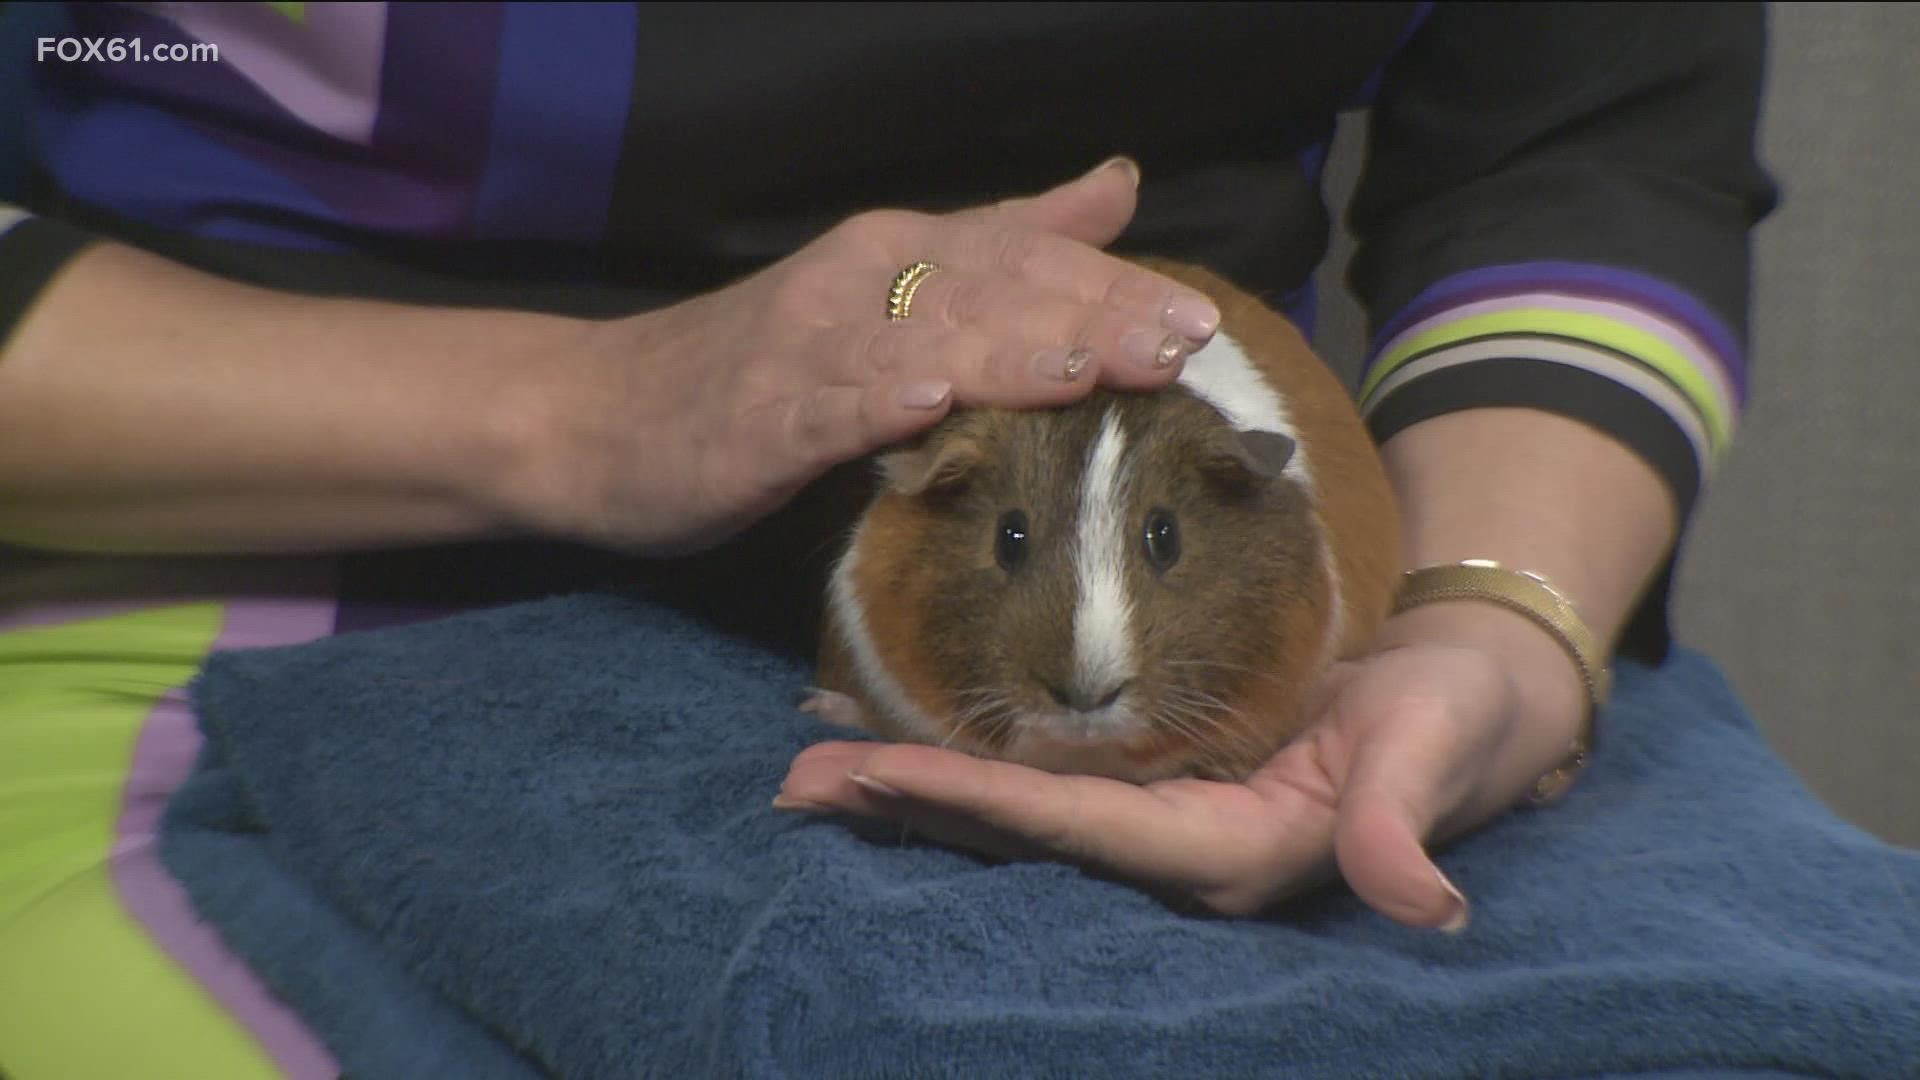 This week's pet of the week is Milo the Guinea pig, who is up for adoption at CT Humane Society.